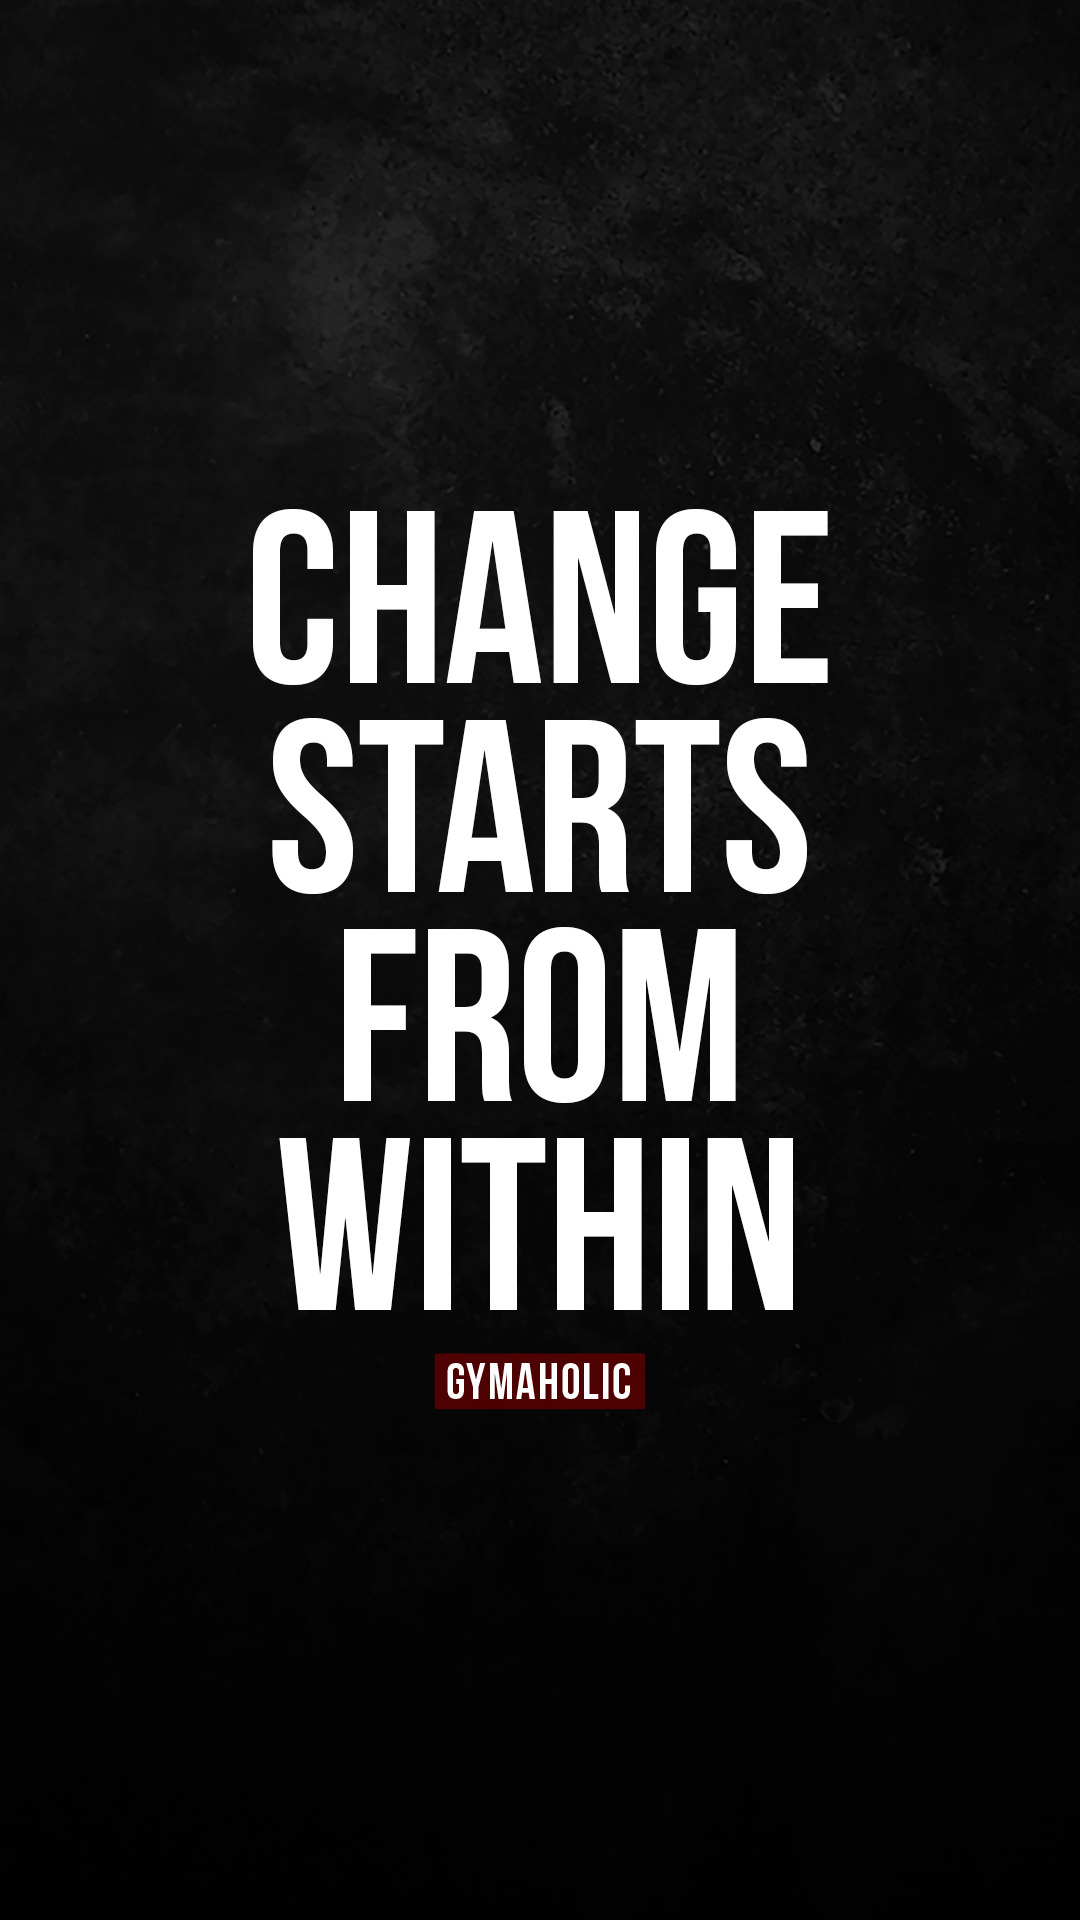 Change starts from within